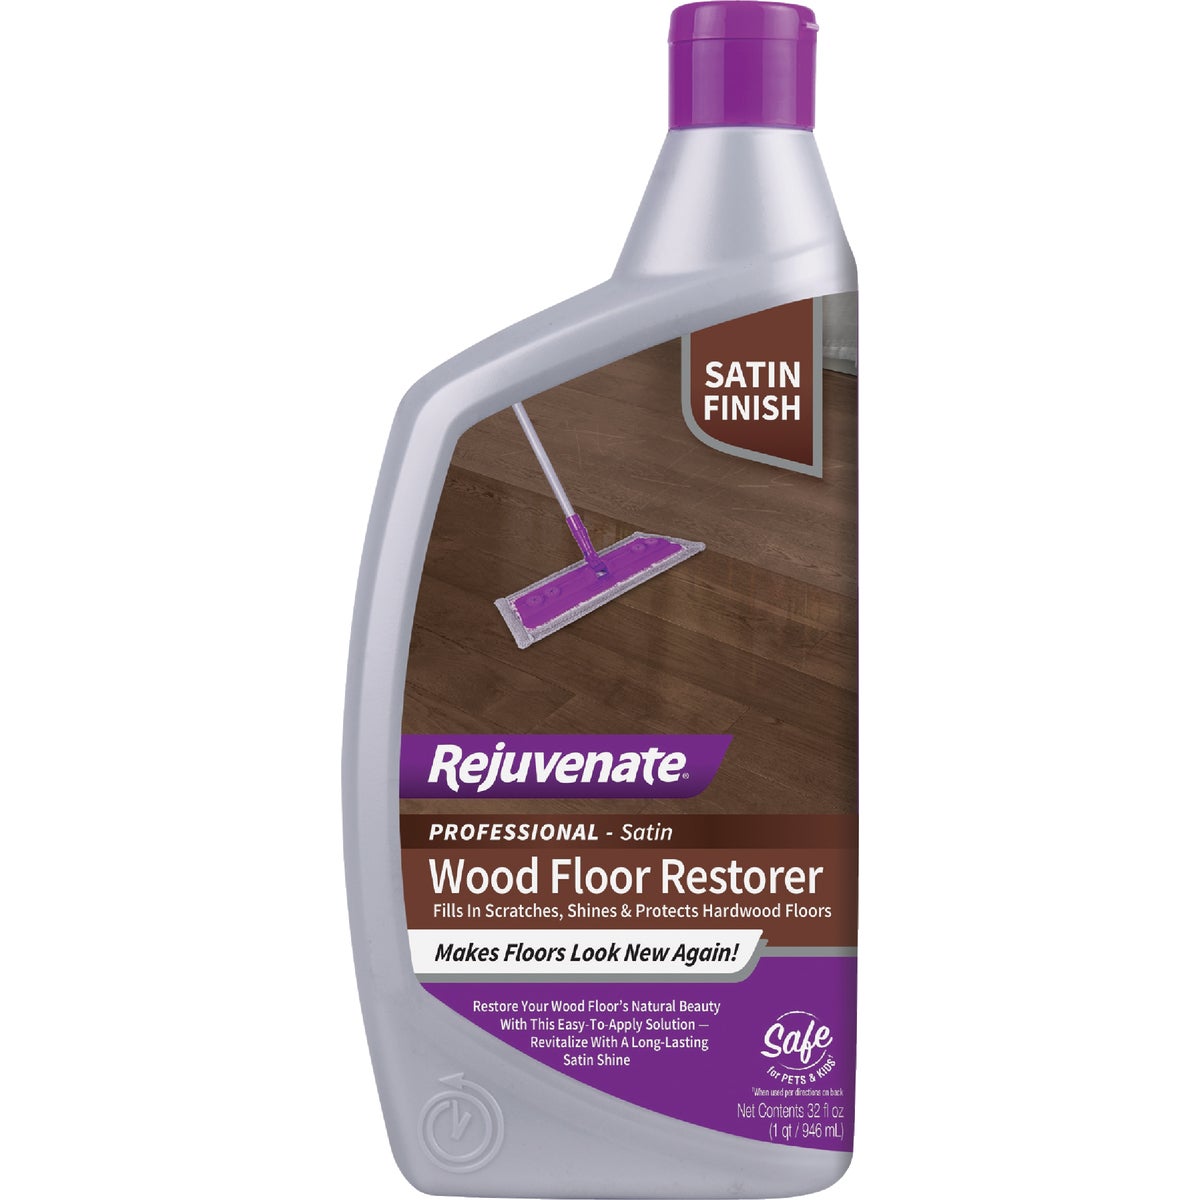 Item 600715, Get your satin new wood floor finish look back in minutes with a 